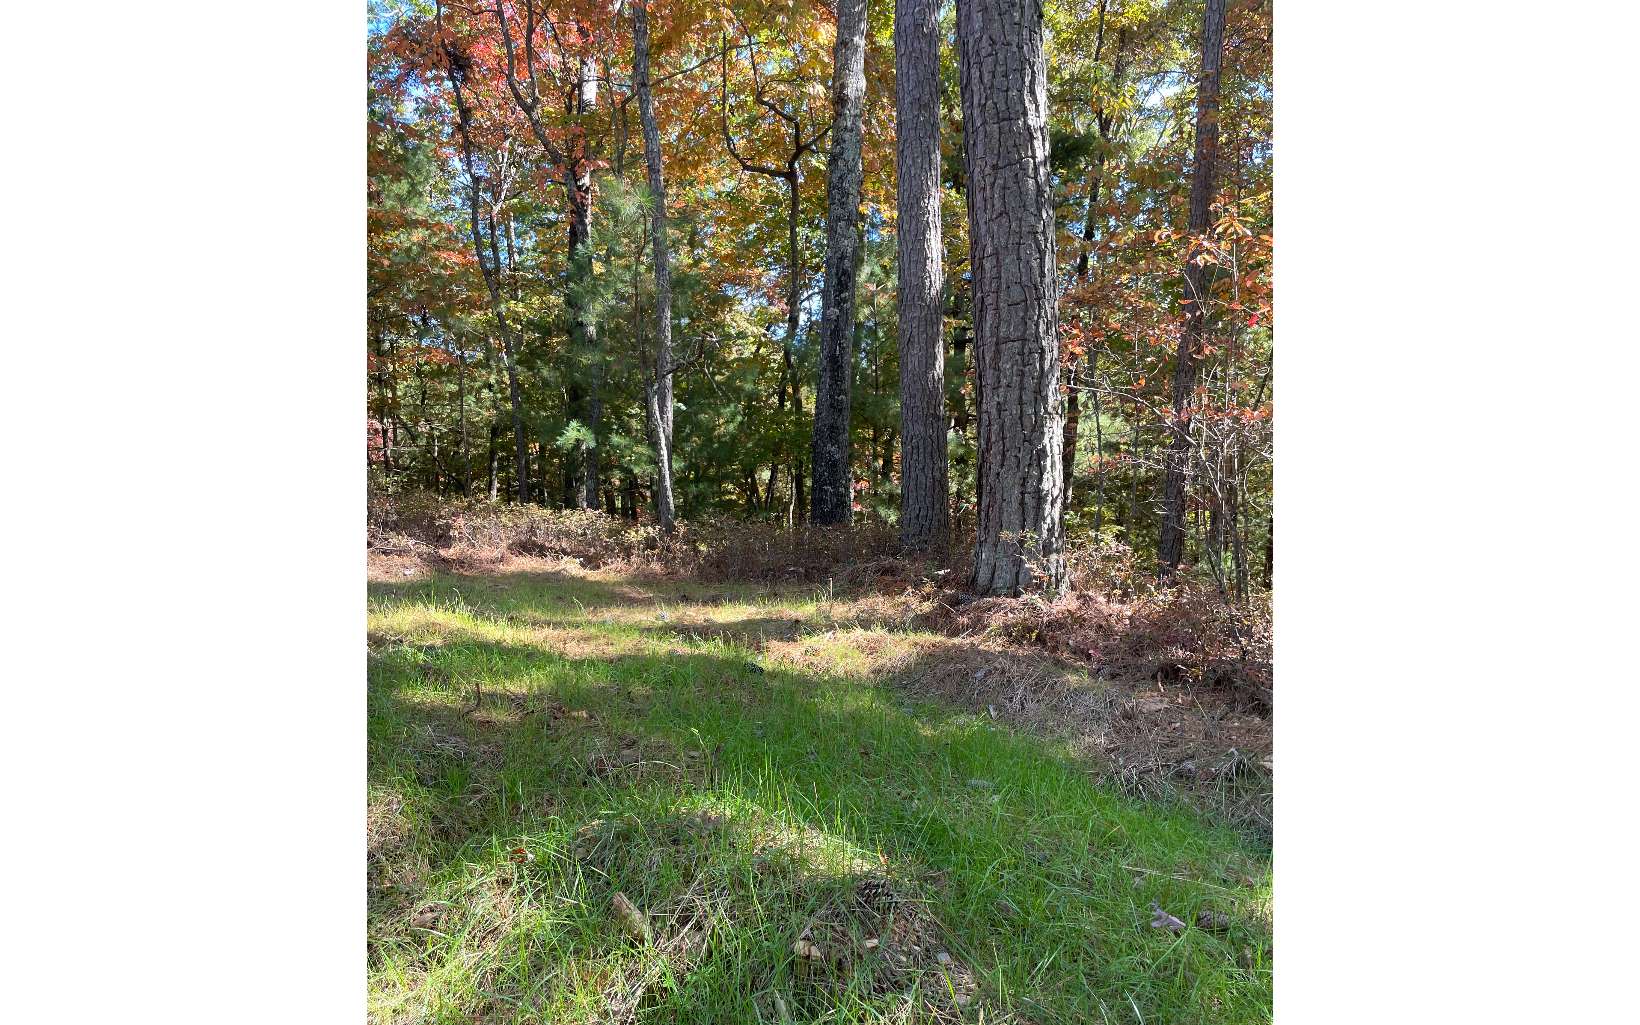 This beautiful UNRESTRICTED property tucked away in Mineral Bluff is a true gem. It is 1.61+/- acres that runs adjacent to the Toccoa River, with total river access, complete with a boat launch area! This land has been surveyed and soil/mineral tested. Surveyors also marked off the perfect spot to build your dream home on the property. It is on city water and electricity that just needs to be tapped into at the road and ran to homesite. The only thing this property needs is a septic tank! Come check out this beautiful property today, this one won't last long!